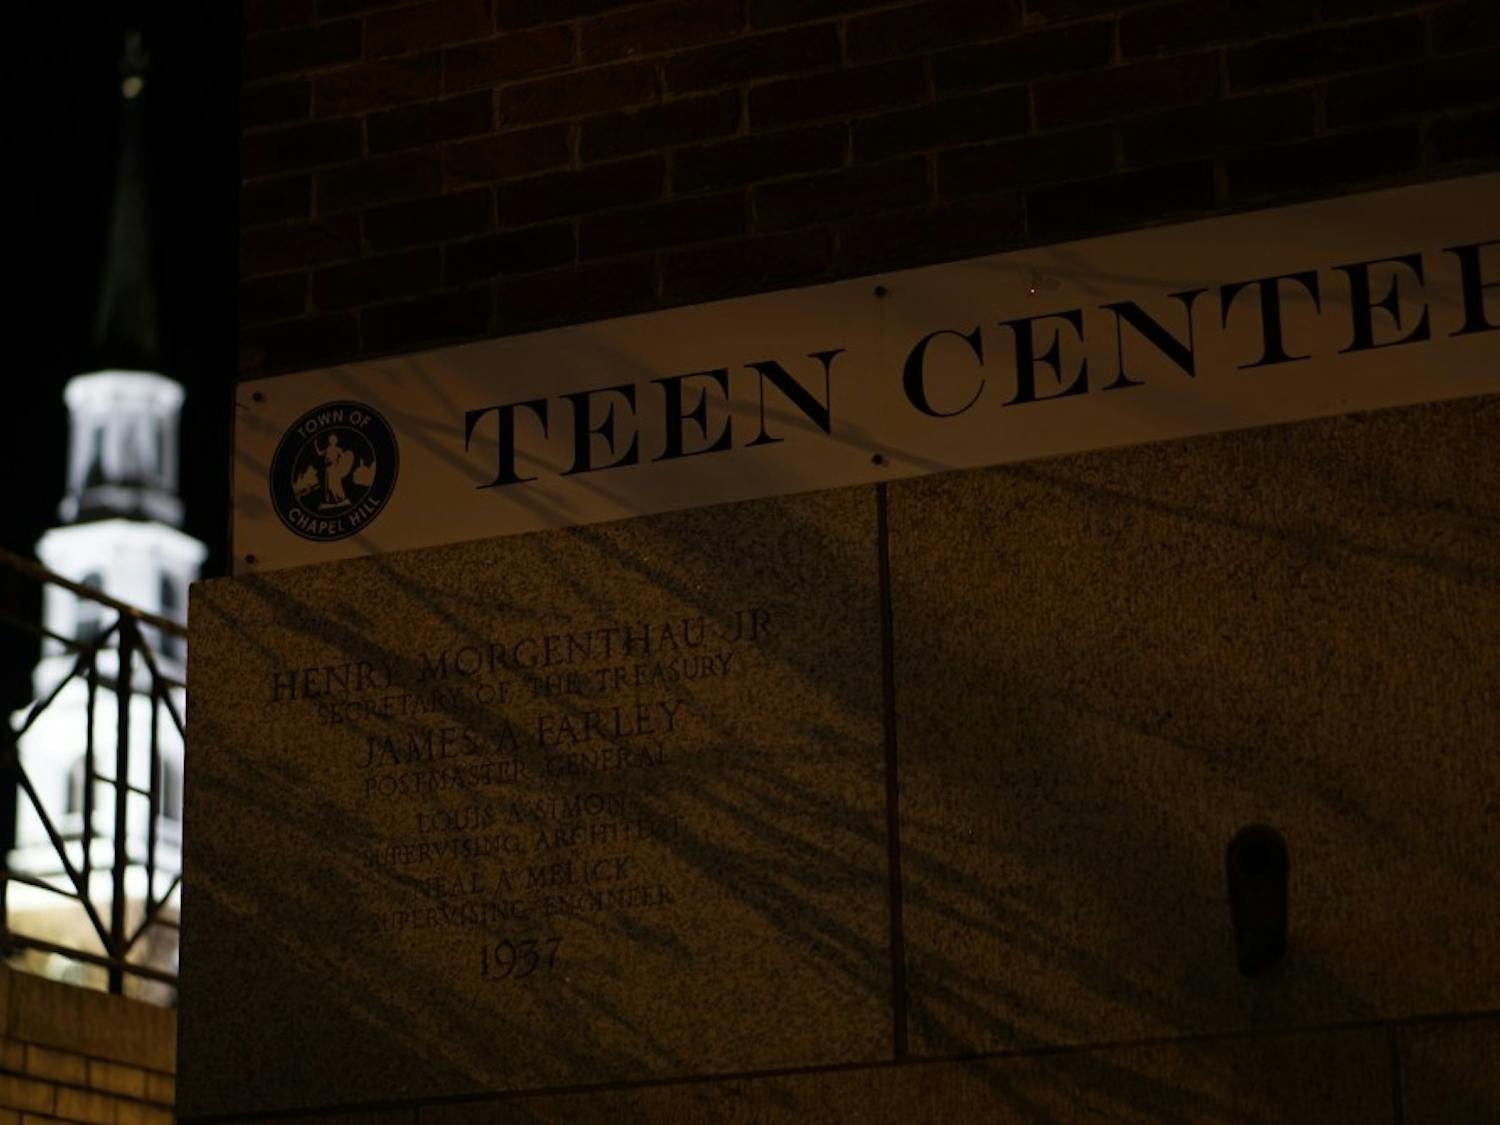 The Chapel Hill Town Council hopes to make improvements by engaging more youth in the community by utilizing resources like the Teen Center on 179 E Franklin St. 